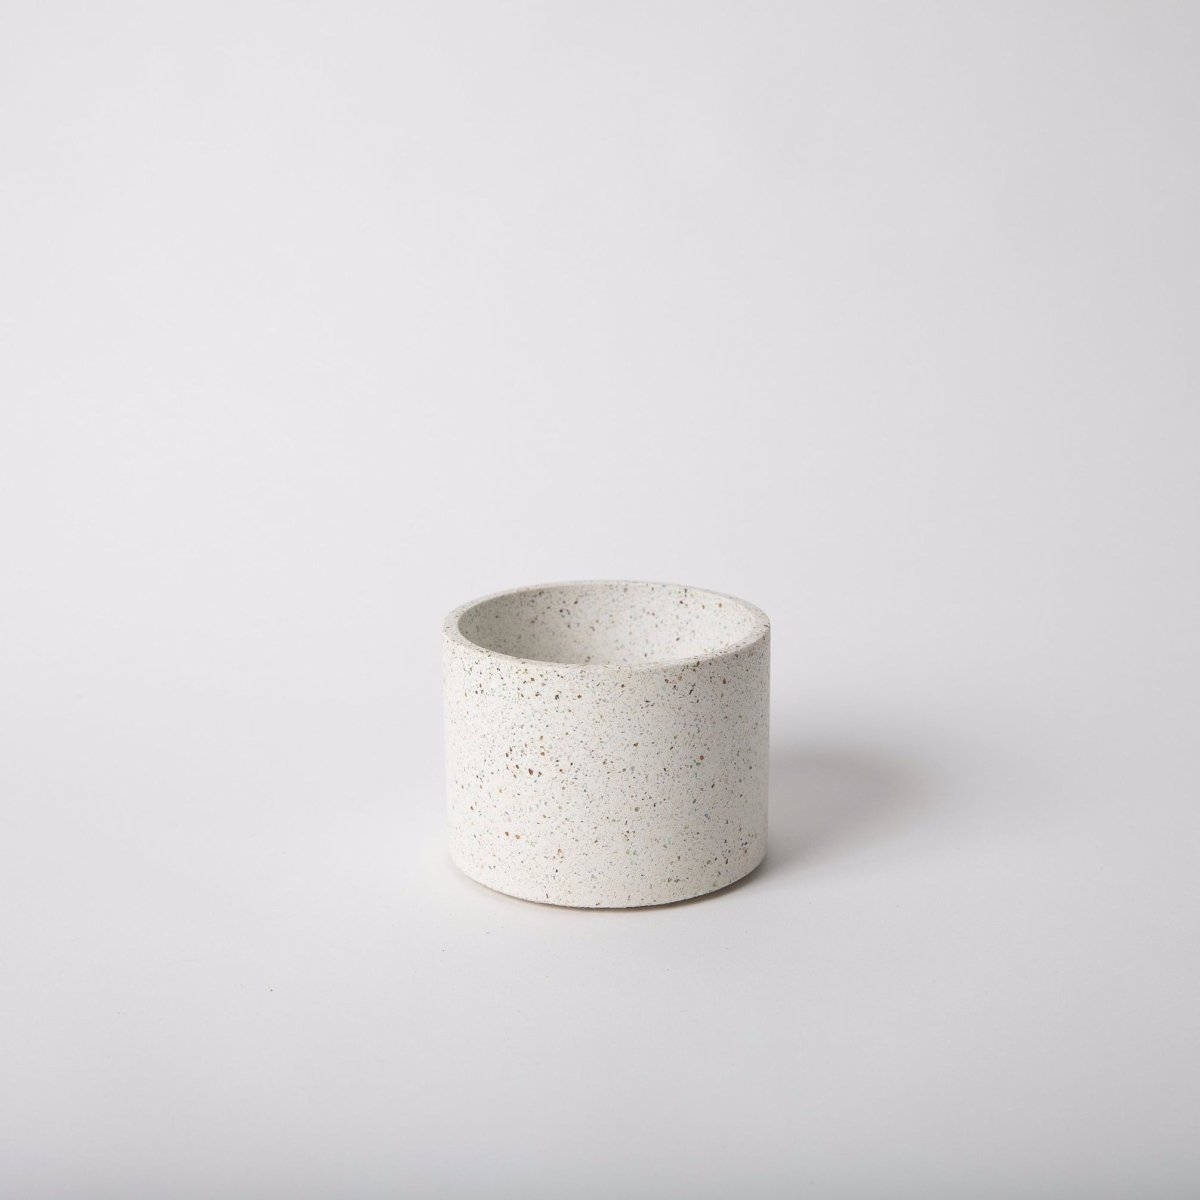 Four inch vessel in the shade white terrazzo. Made by Pretti.Cool in Houston, Texas.